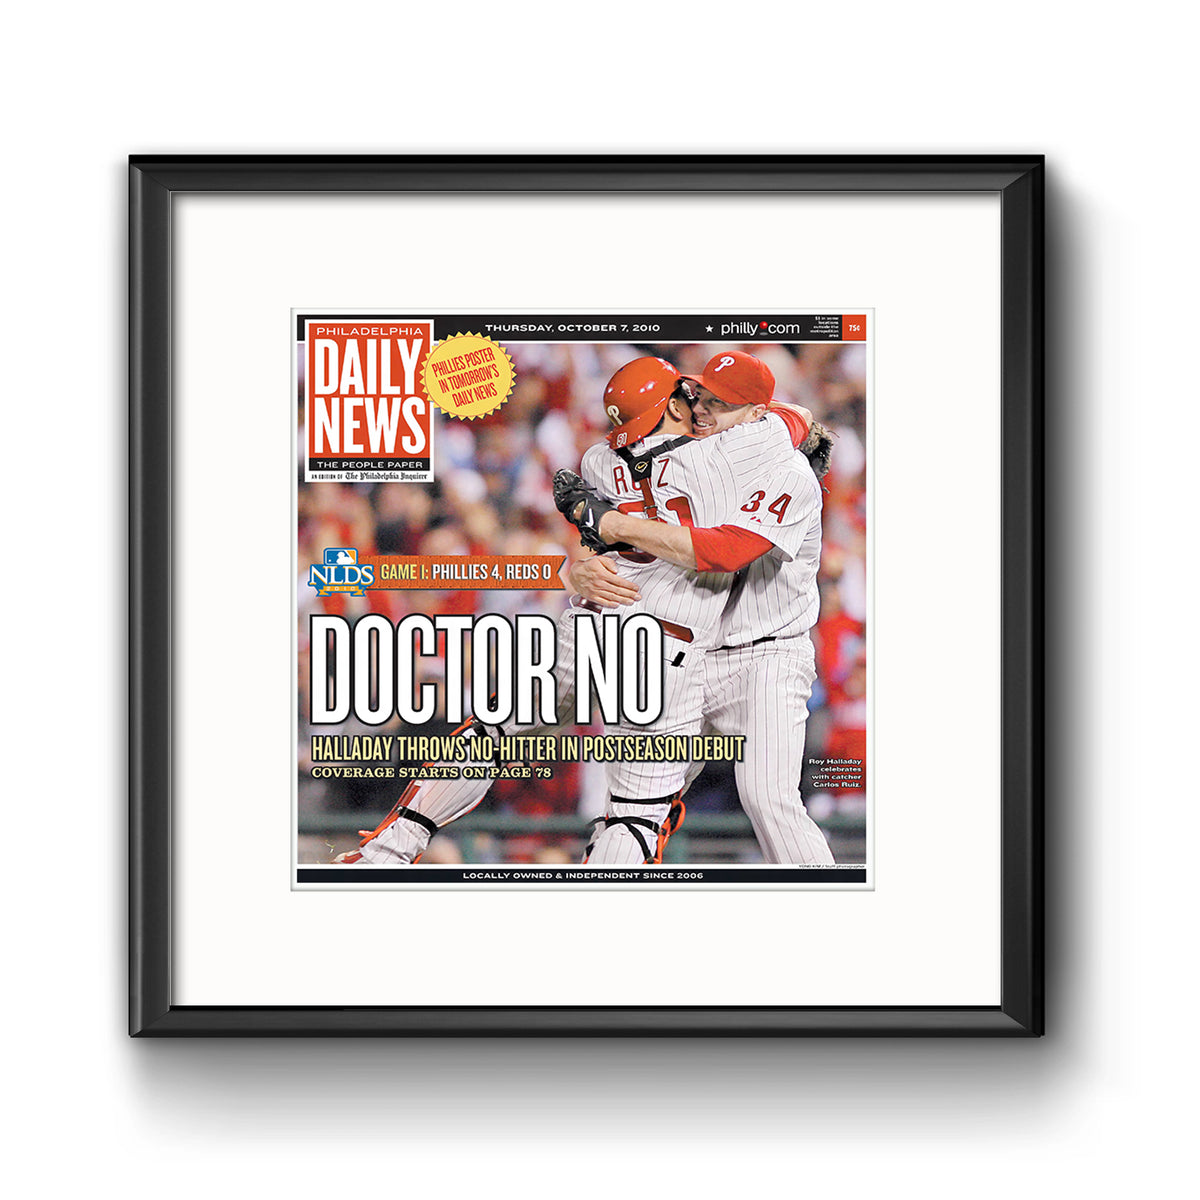 Doctor No Philadelphia Phillies - Photograph Print – The Inquirer Store